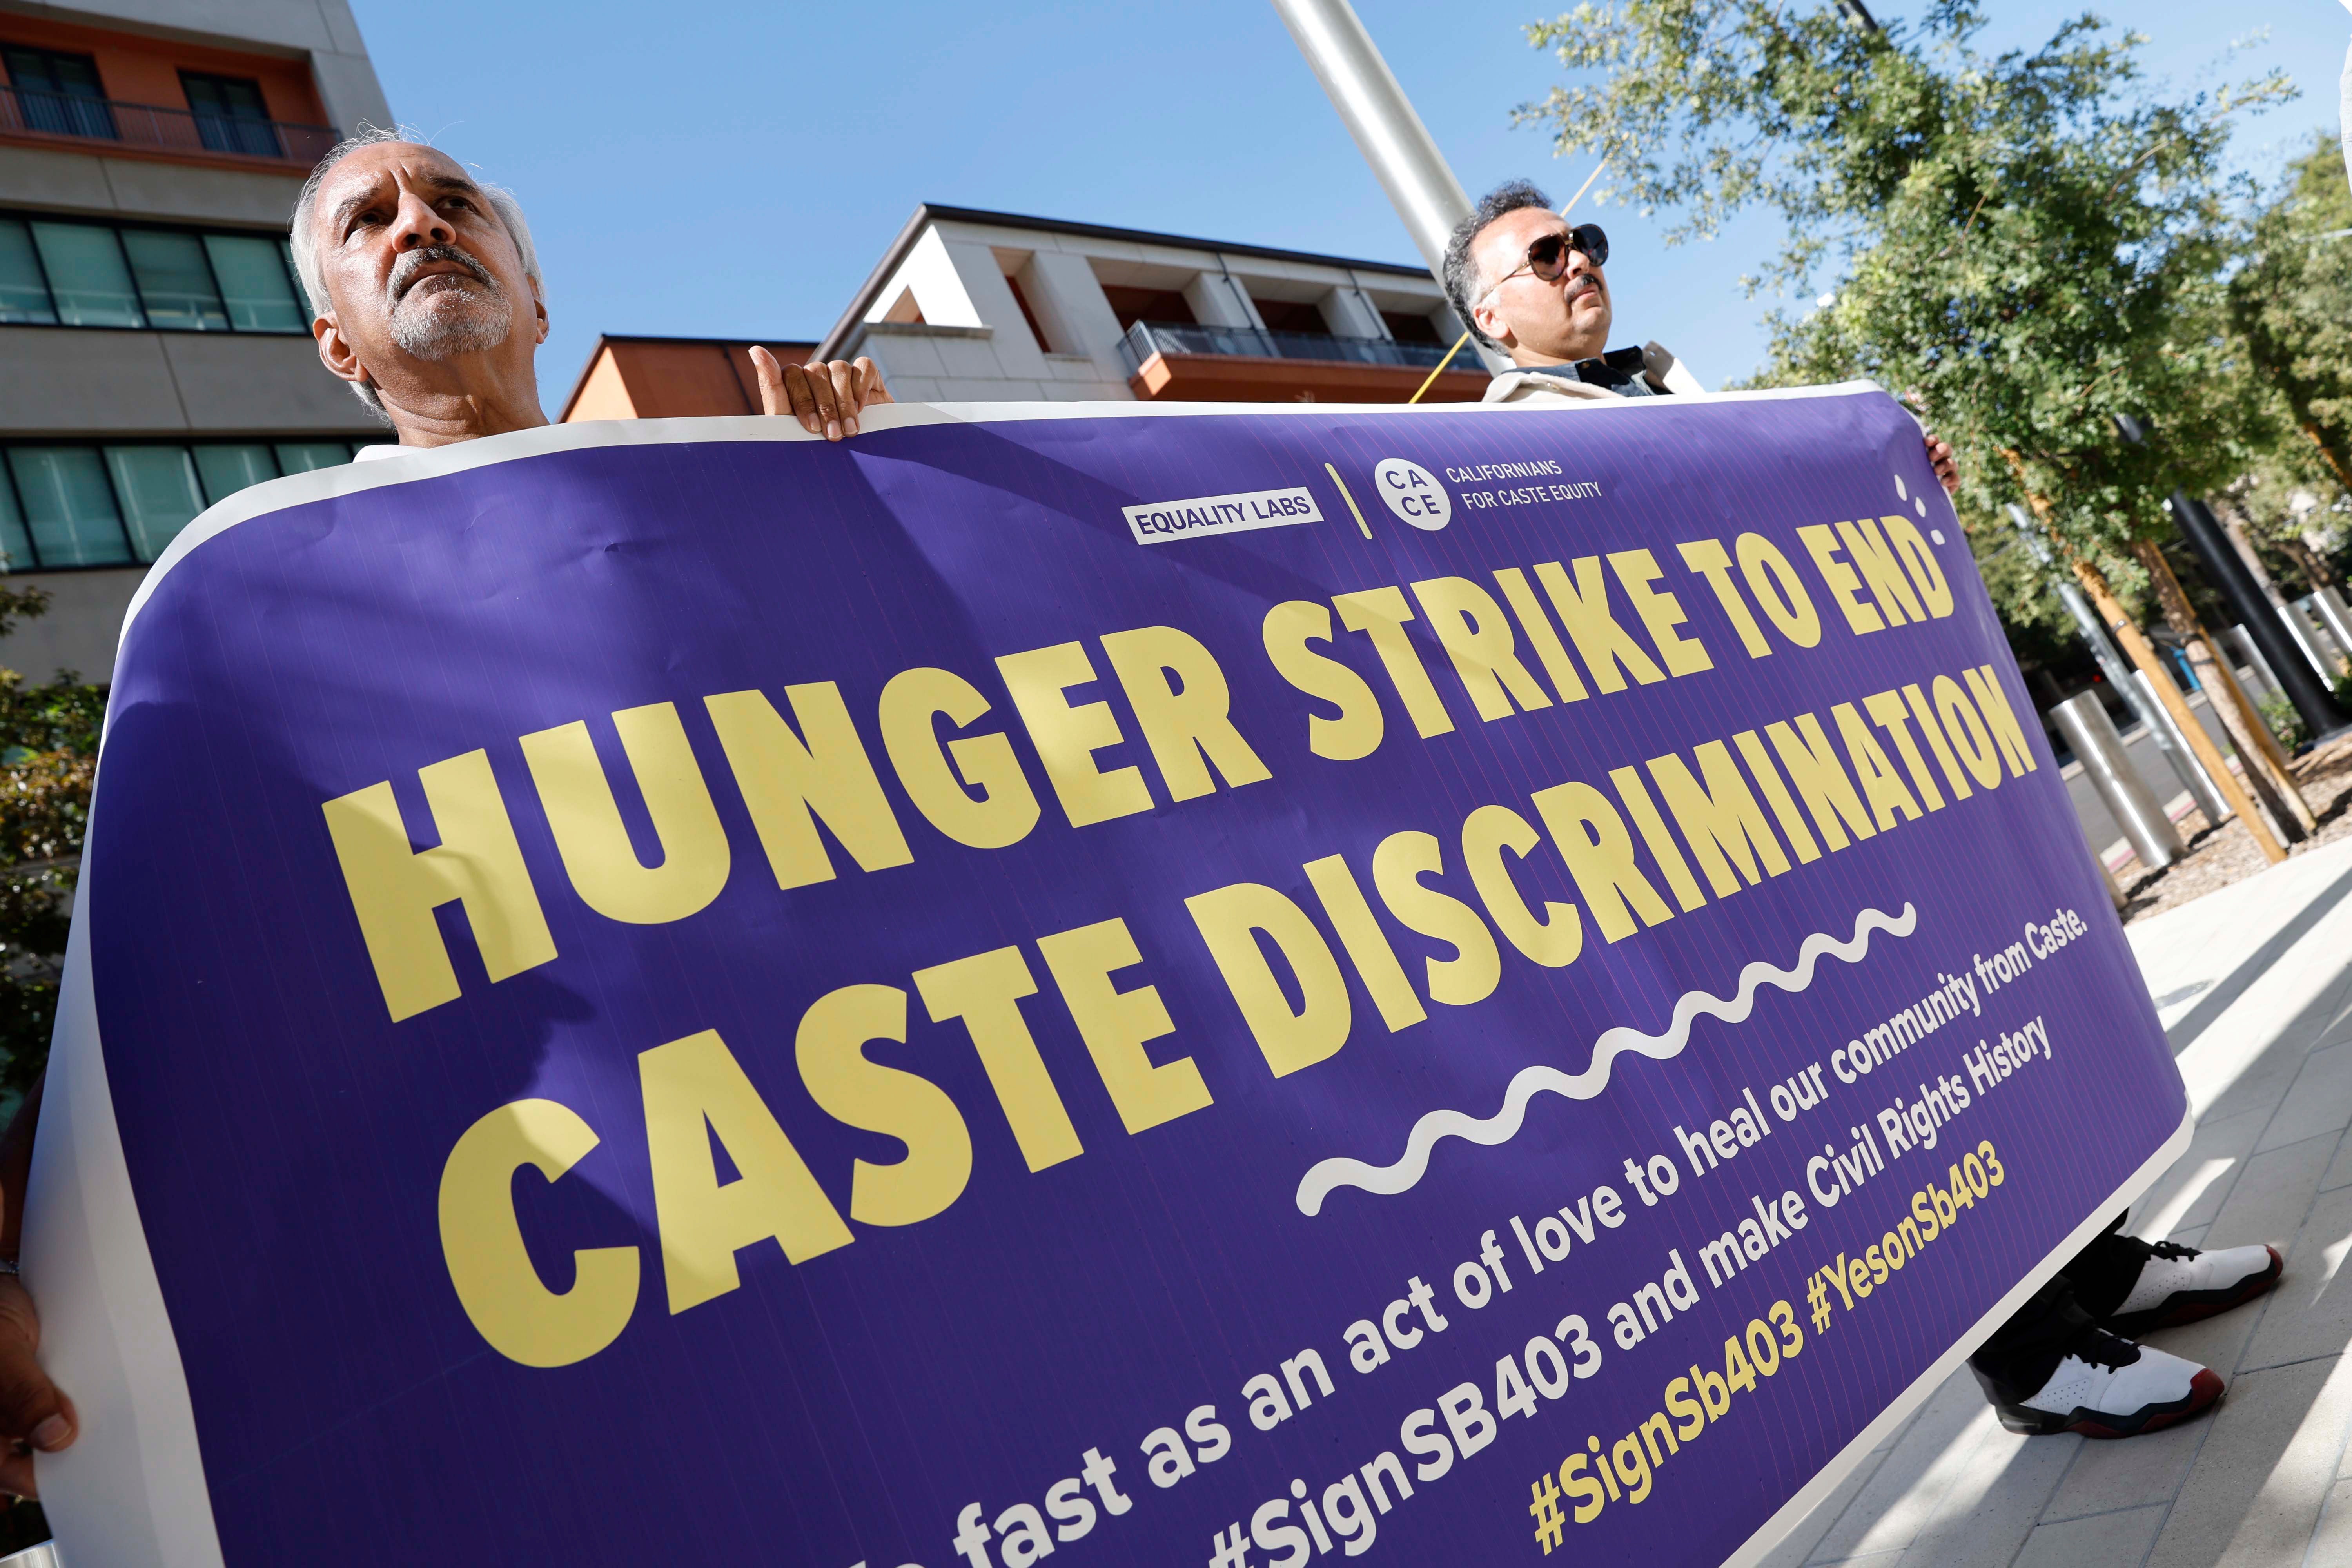 Caste Discrimination Bill SB 403 supporters stage a hunger strike outside the Capitol Annex Swing Space building in California